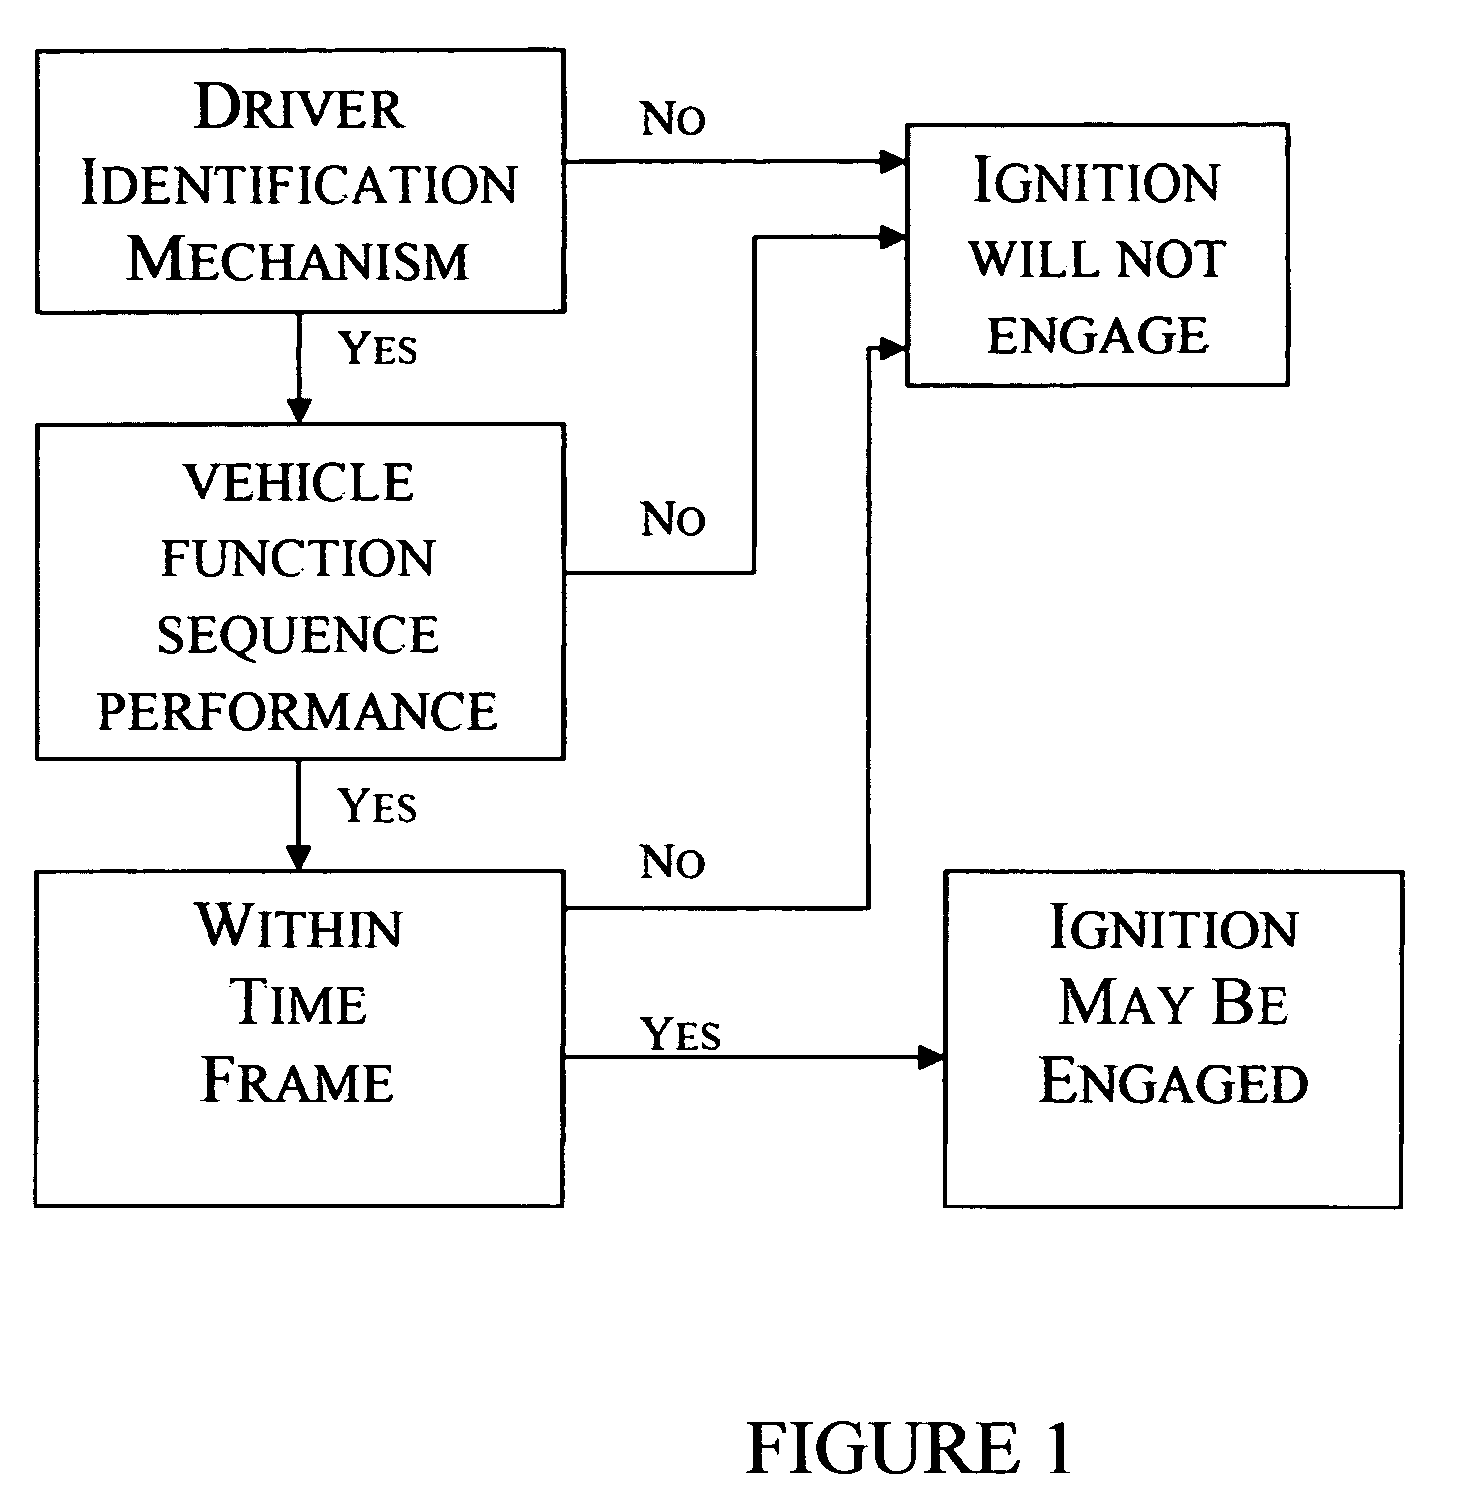 Ignition system with driver identification